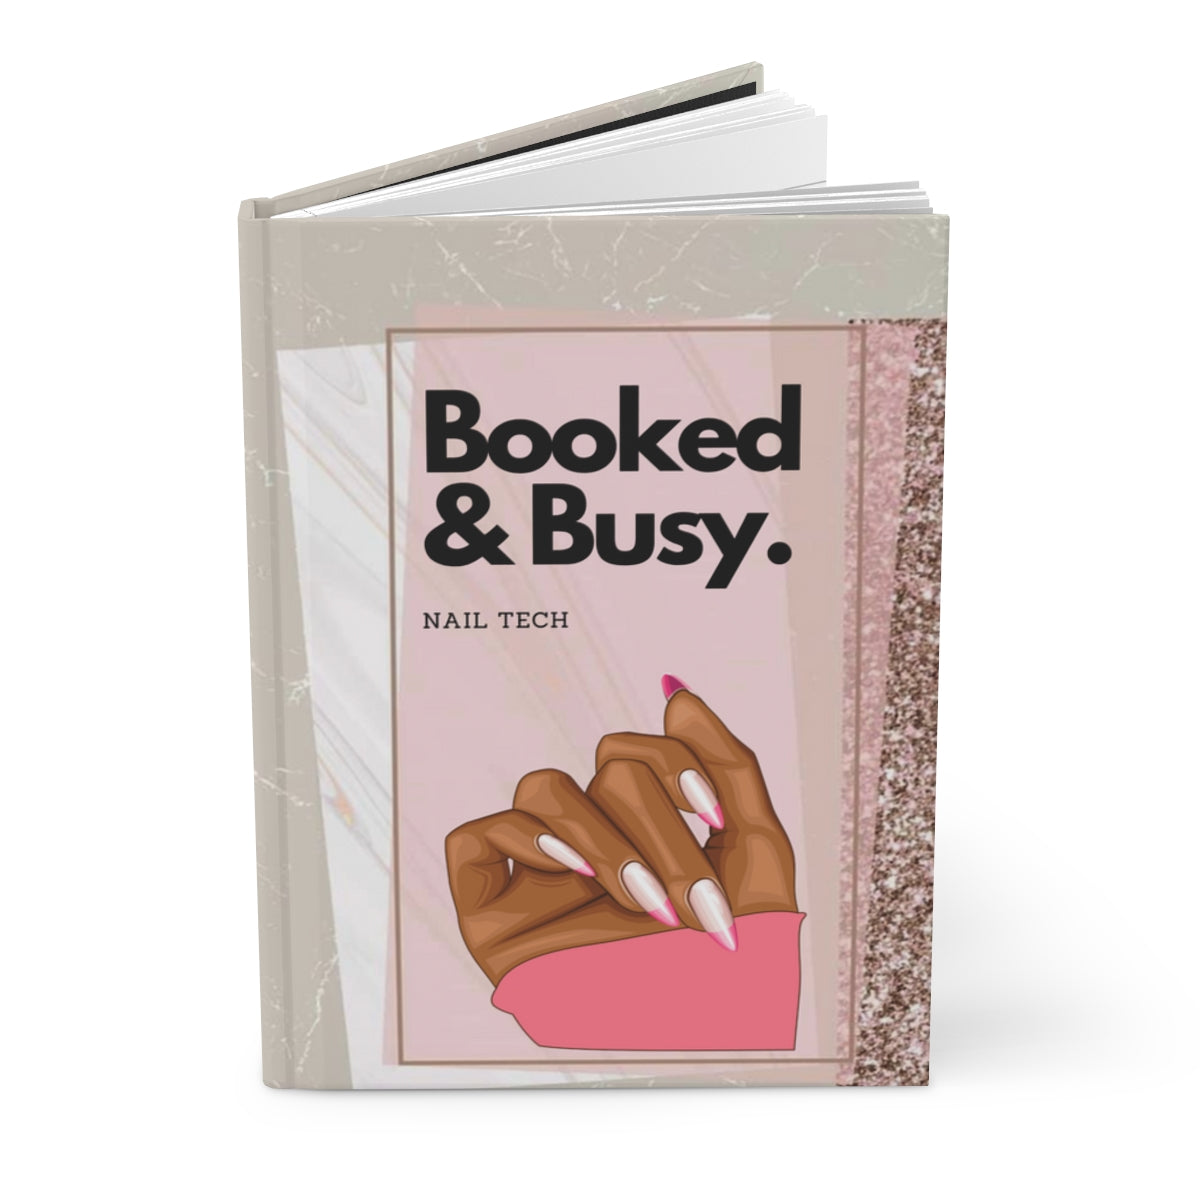 Booked & Busy (Nail Tech) Hardcover Journal